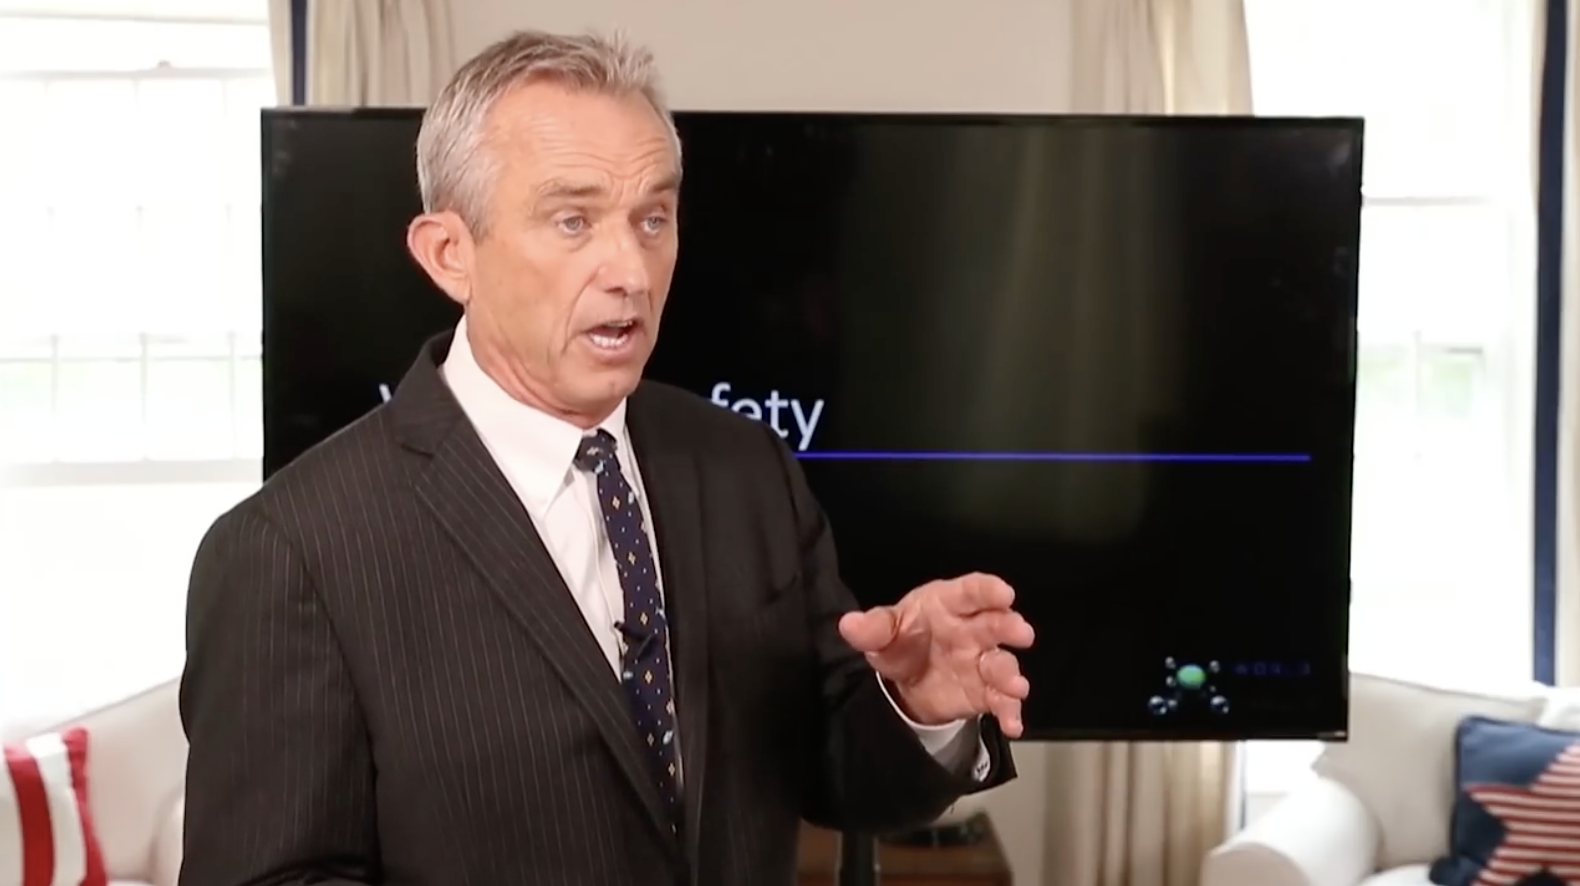 Image: Robert F. Kennedy Jr. warns that Fauci, Gates are committing mass genocide against humanity